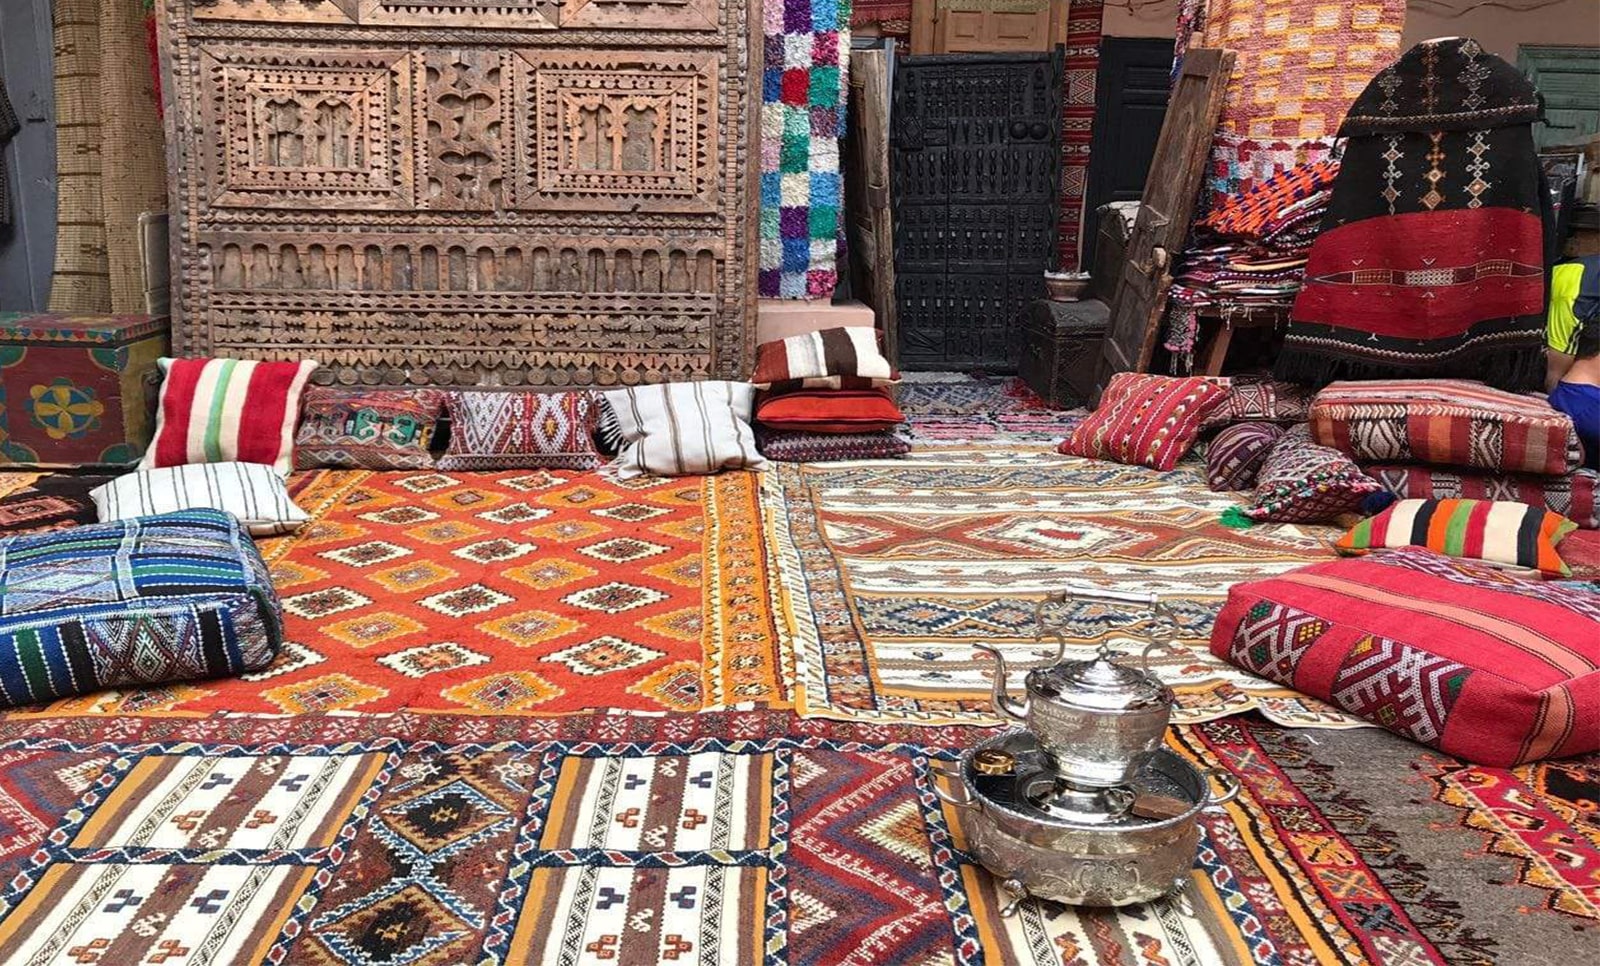 How can you tell if your vintage Moroccan rug is actually vintage?